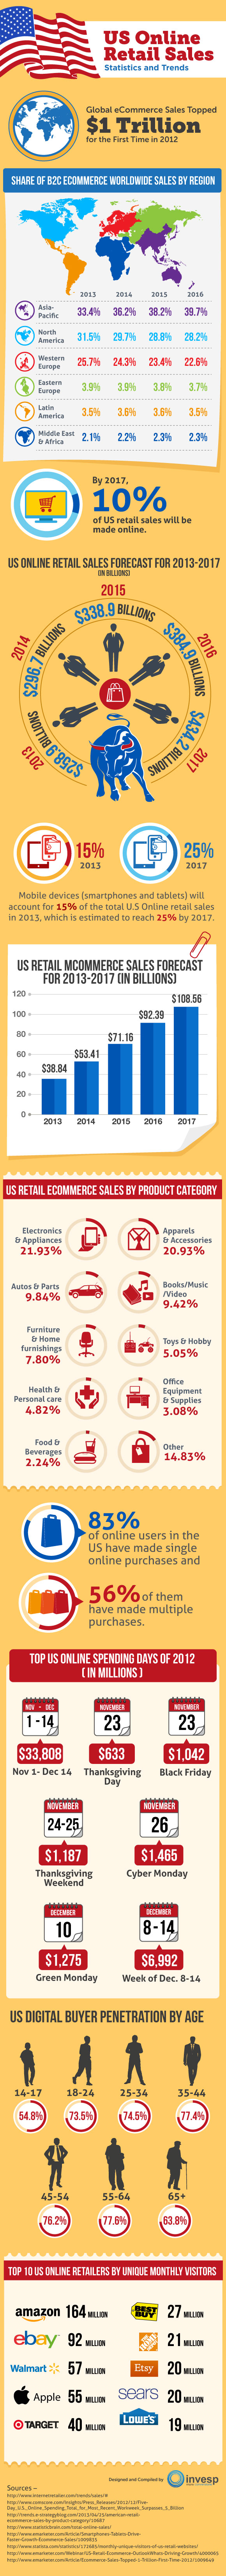 us-online-retail-sales-statistics-and-trends-infographic_51d840234fe51